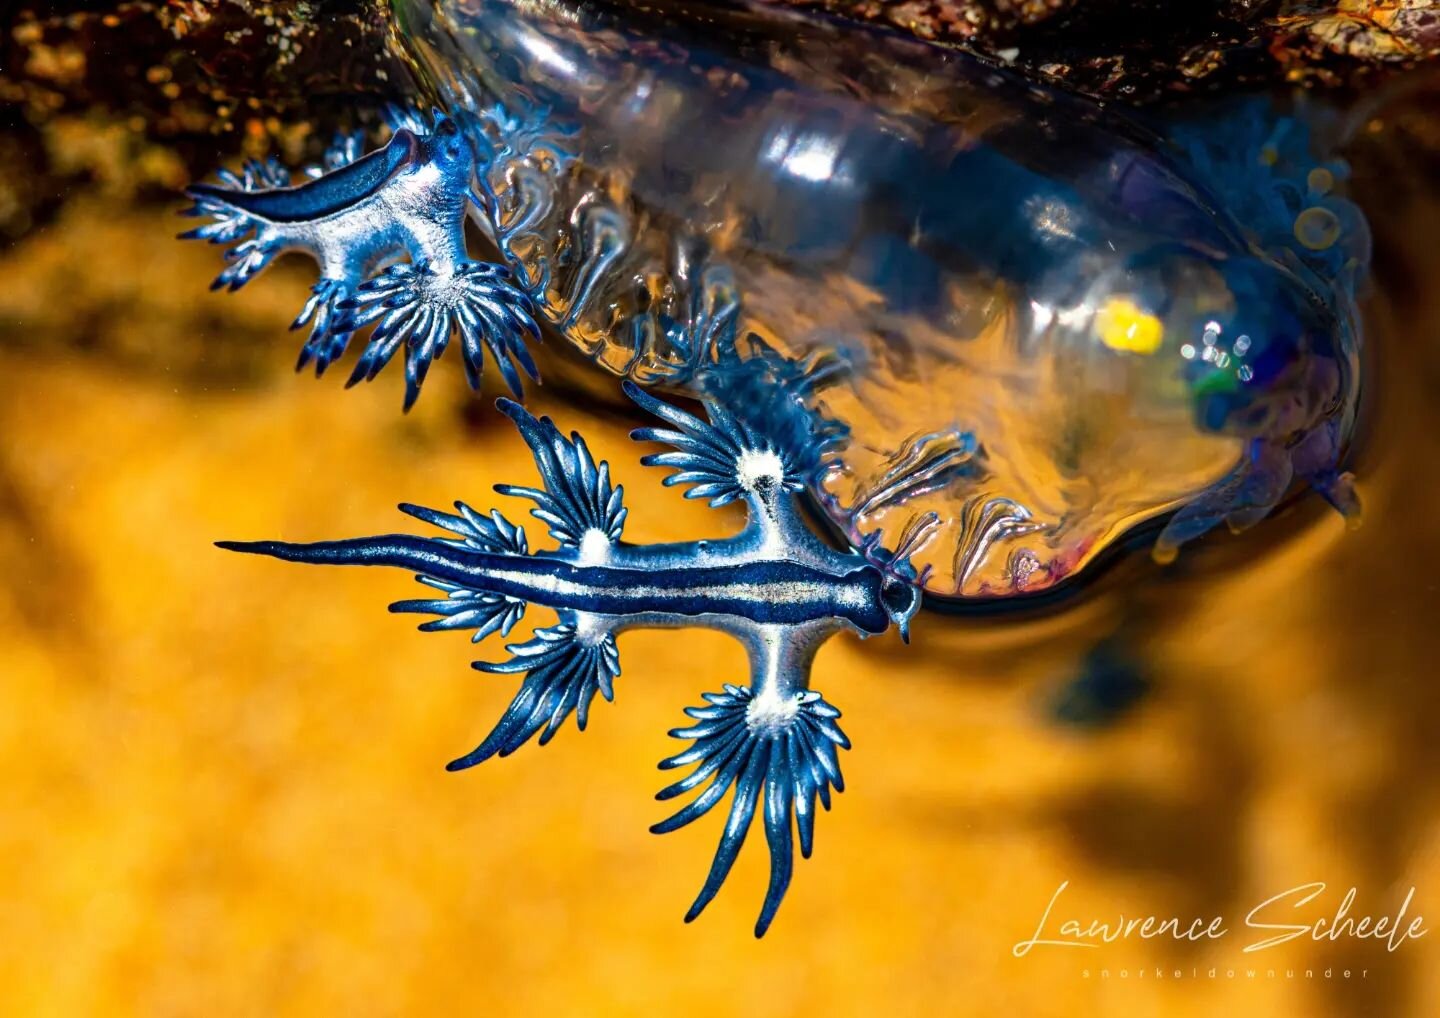 F L E E T 🌊
Blue Dragons (Glaucus &amp; Glaucillia) predating on an Australian Bluebottle (Physalia utriculus). Dragons can recycle the  Bluebottles stinging cells for their own use! Truly a fascinating blue world. Have you seen this behaviour befor